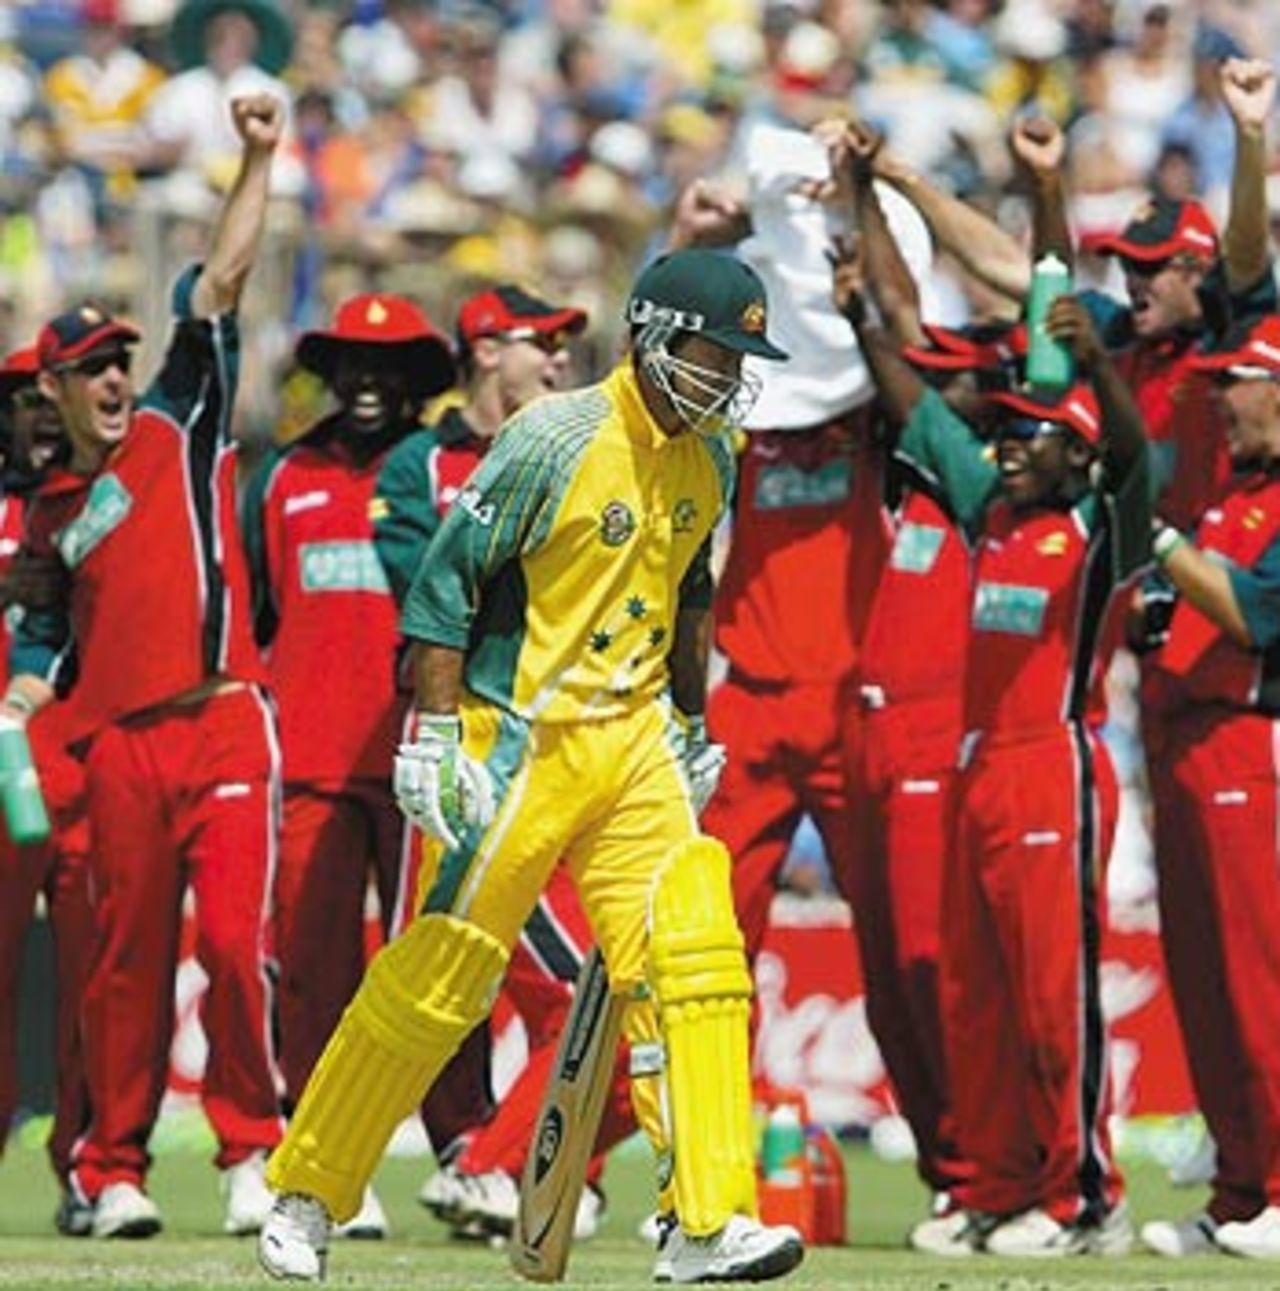 Ricky Ponting begins the walk back after a needless run-out, Australia v Zimbabwe, VB Series, 9th ODI, Adelaide, January 26, 2004